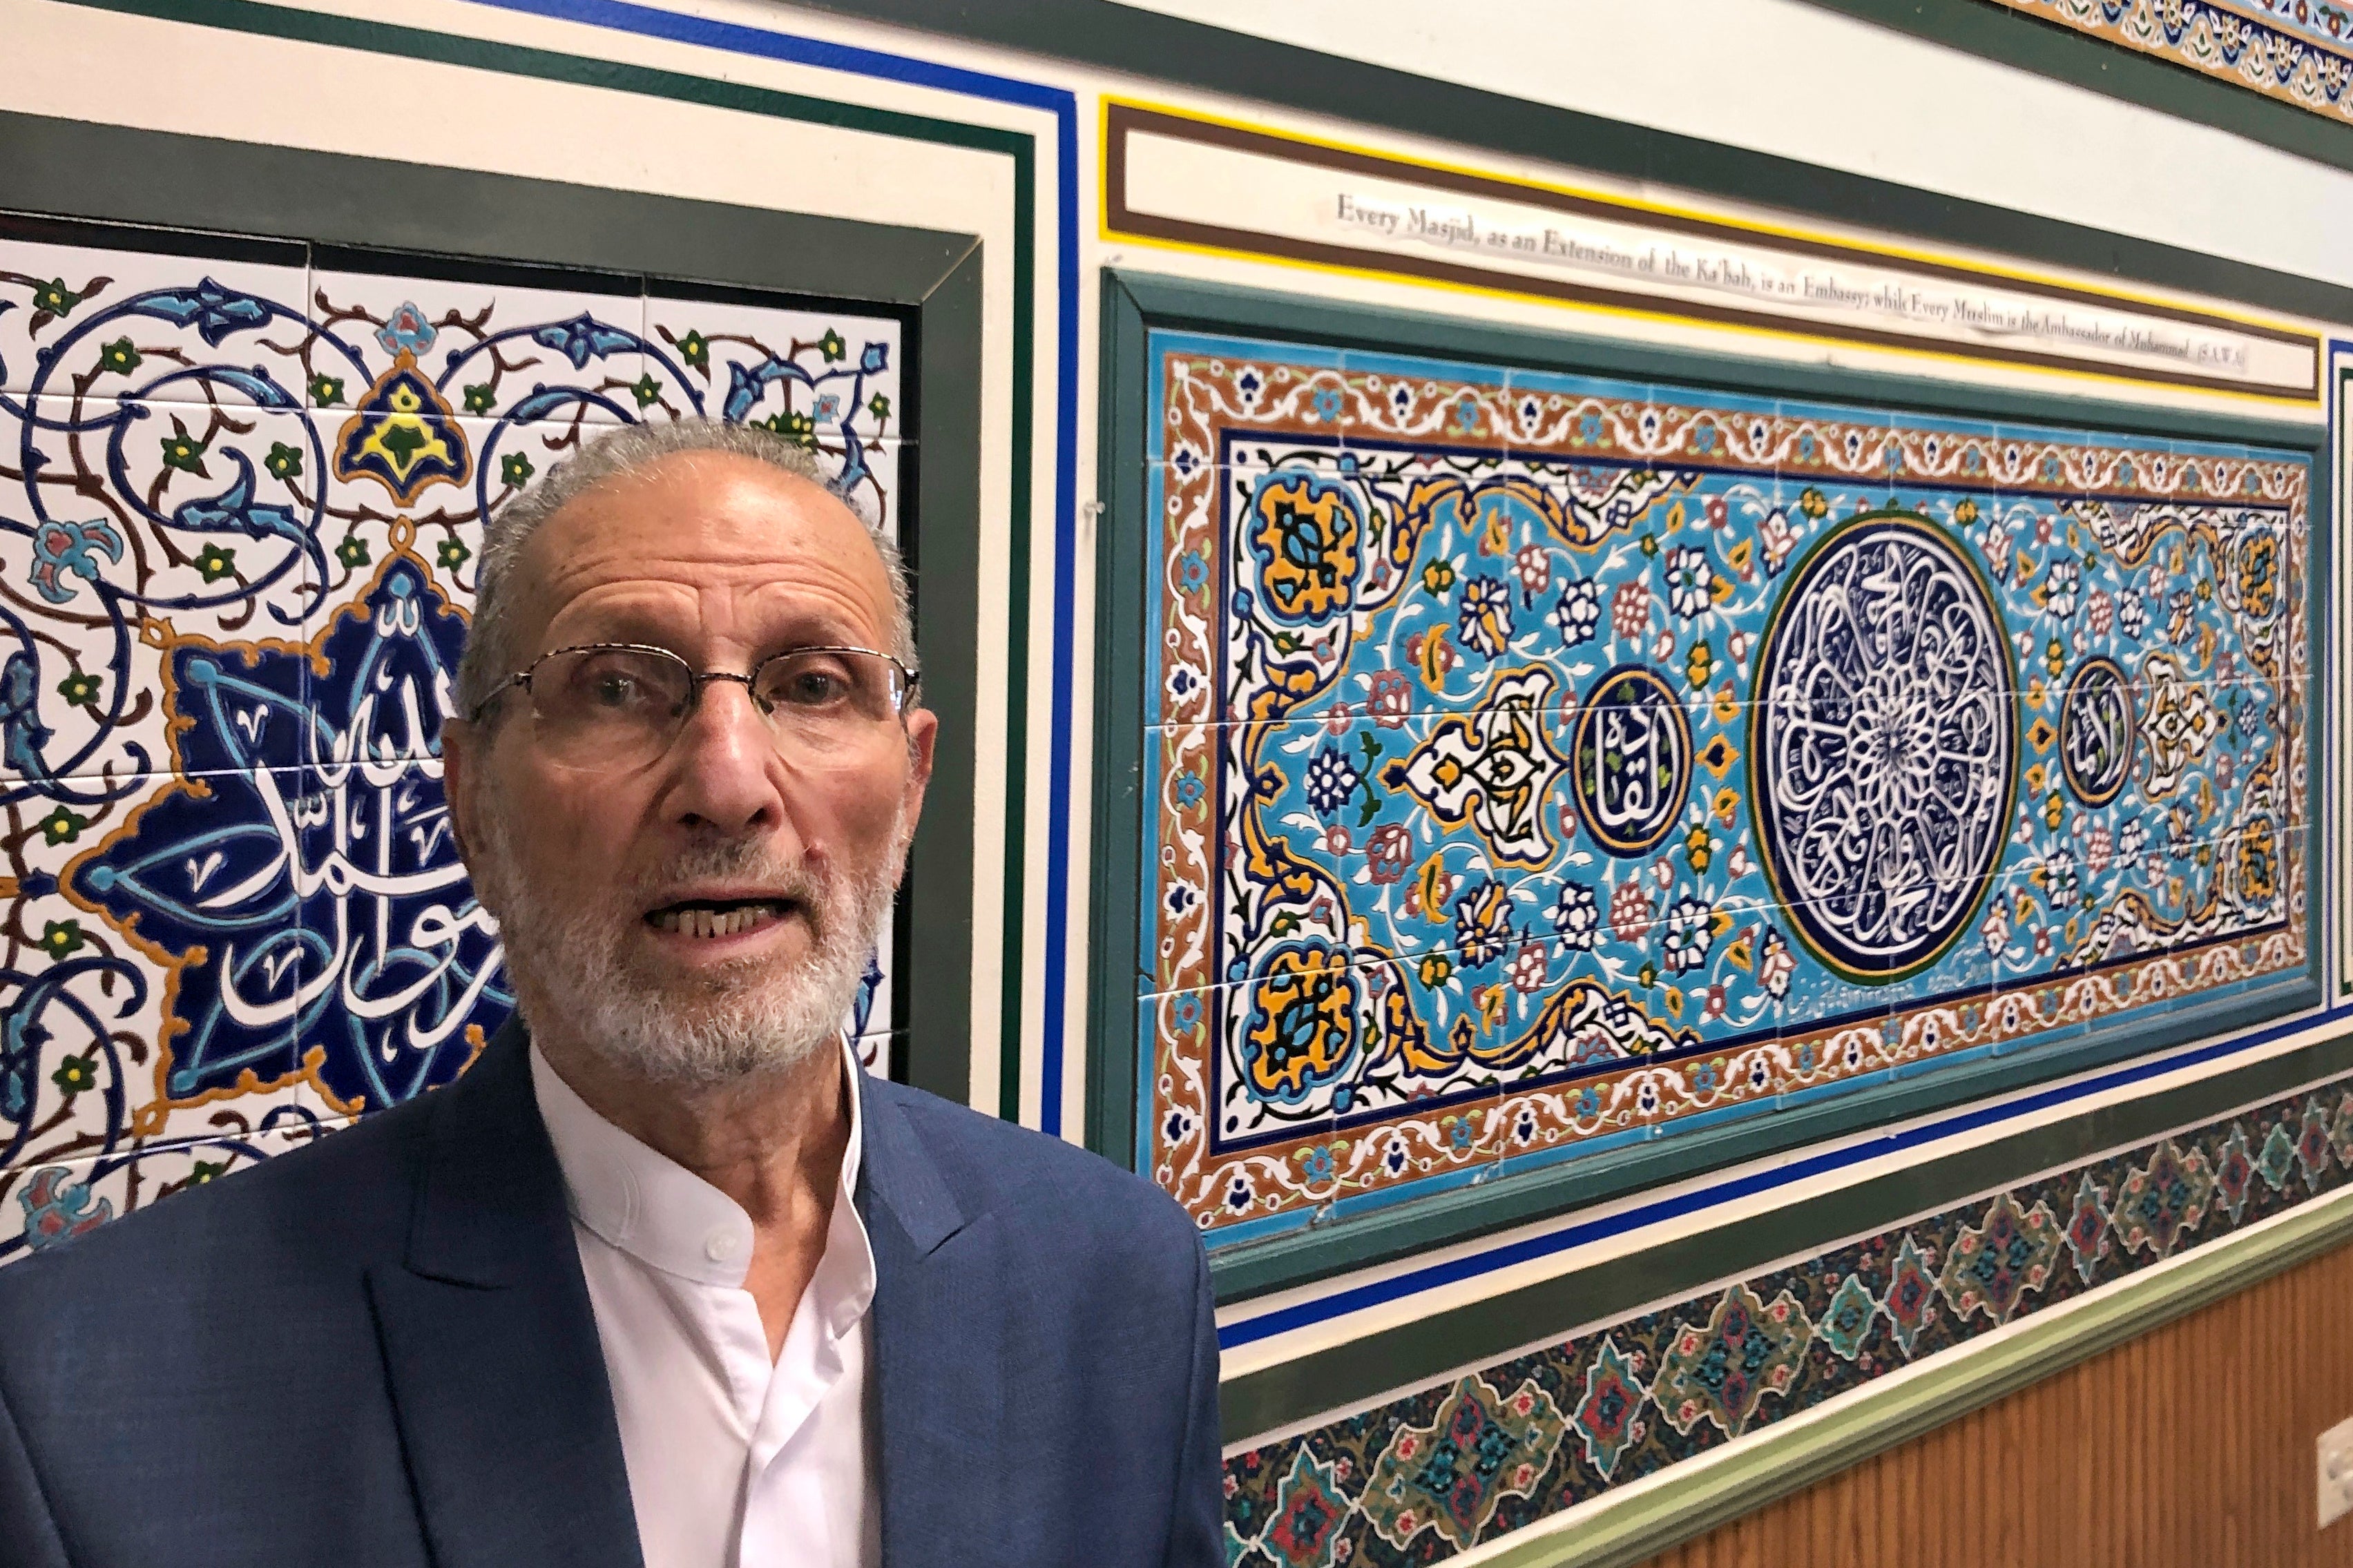 Mosque-Artwork Impounded